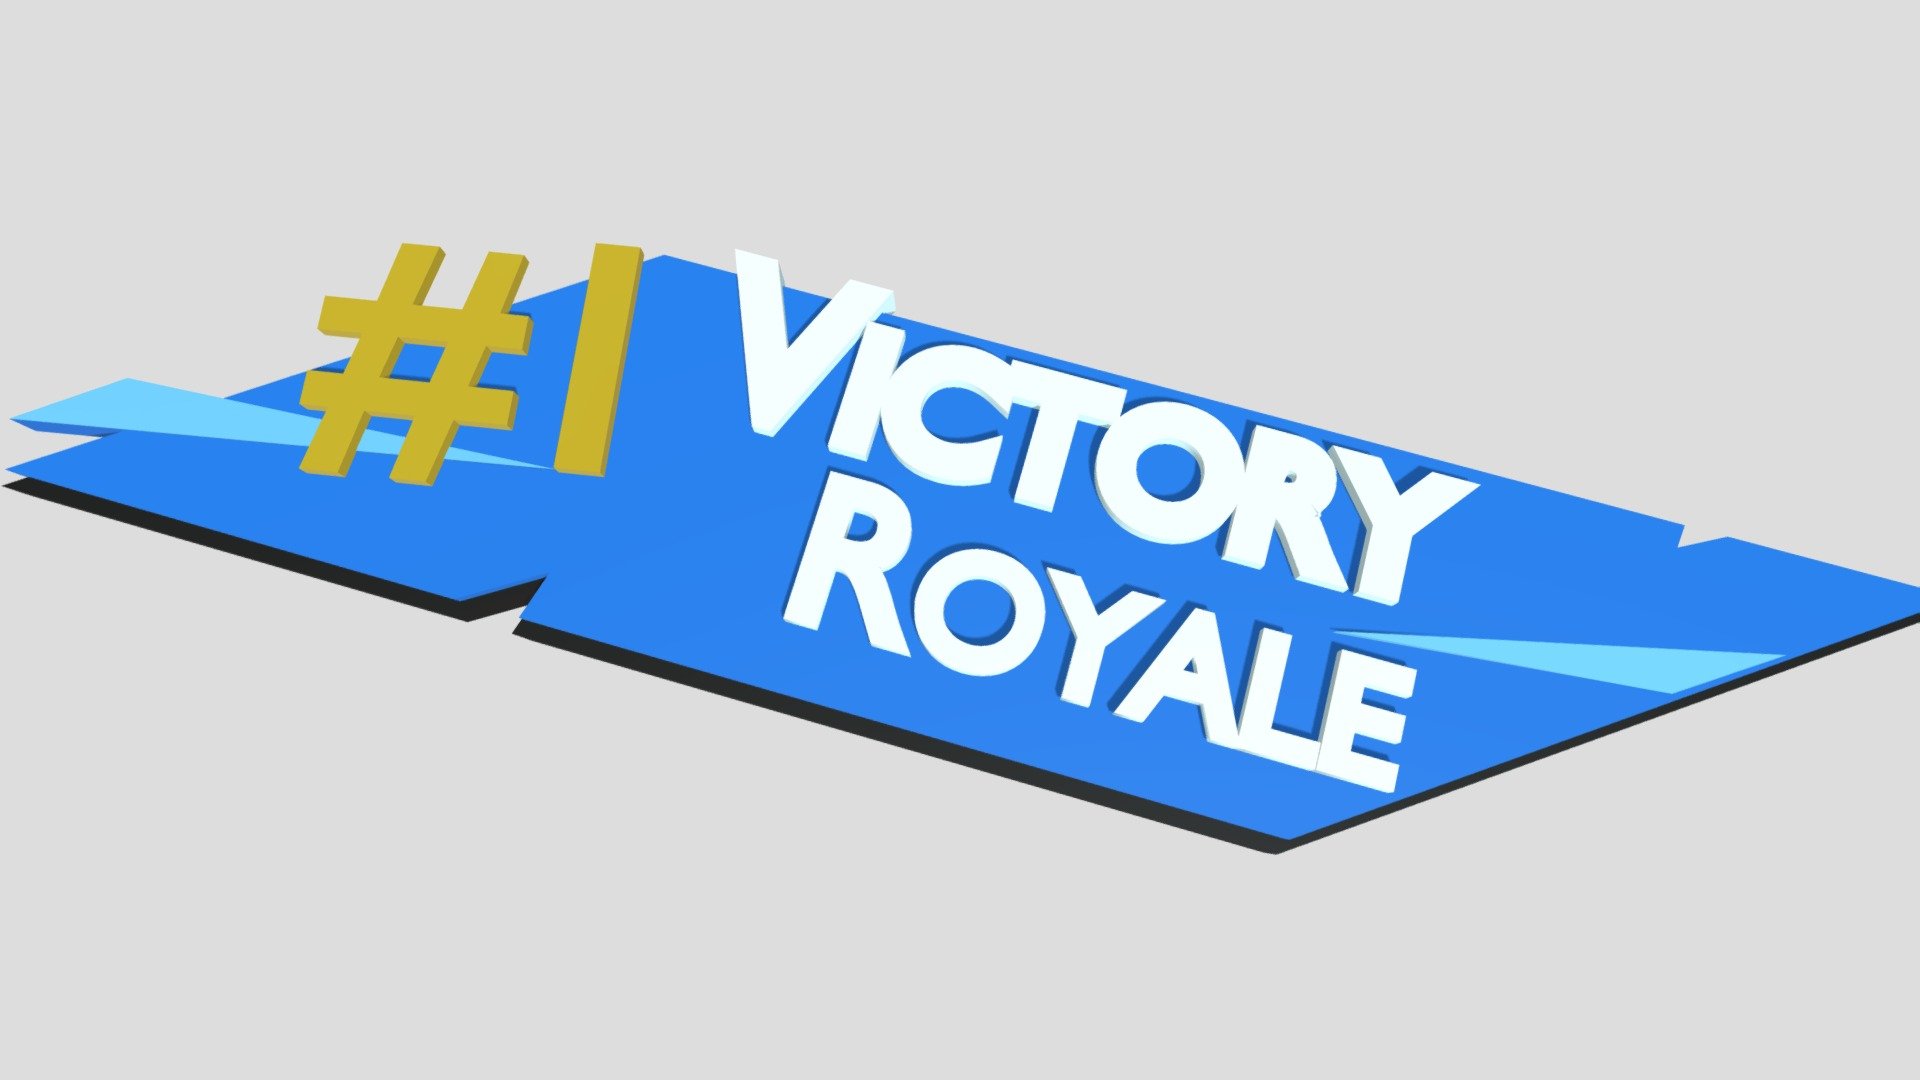 Fortnite Victory Royale - Download Free 3D model by ImAGhost (@ImAGhost)  [72a5fbd]